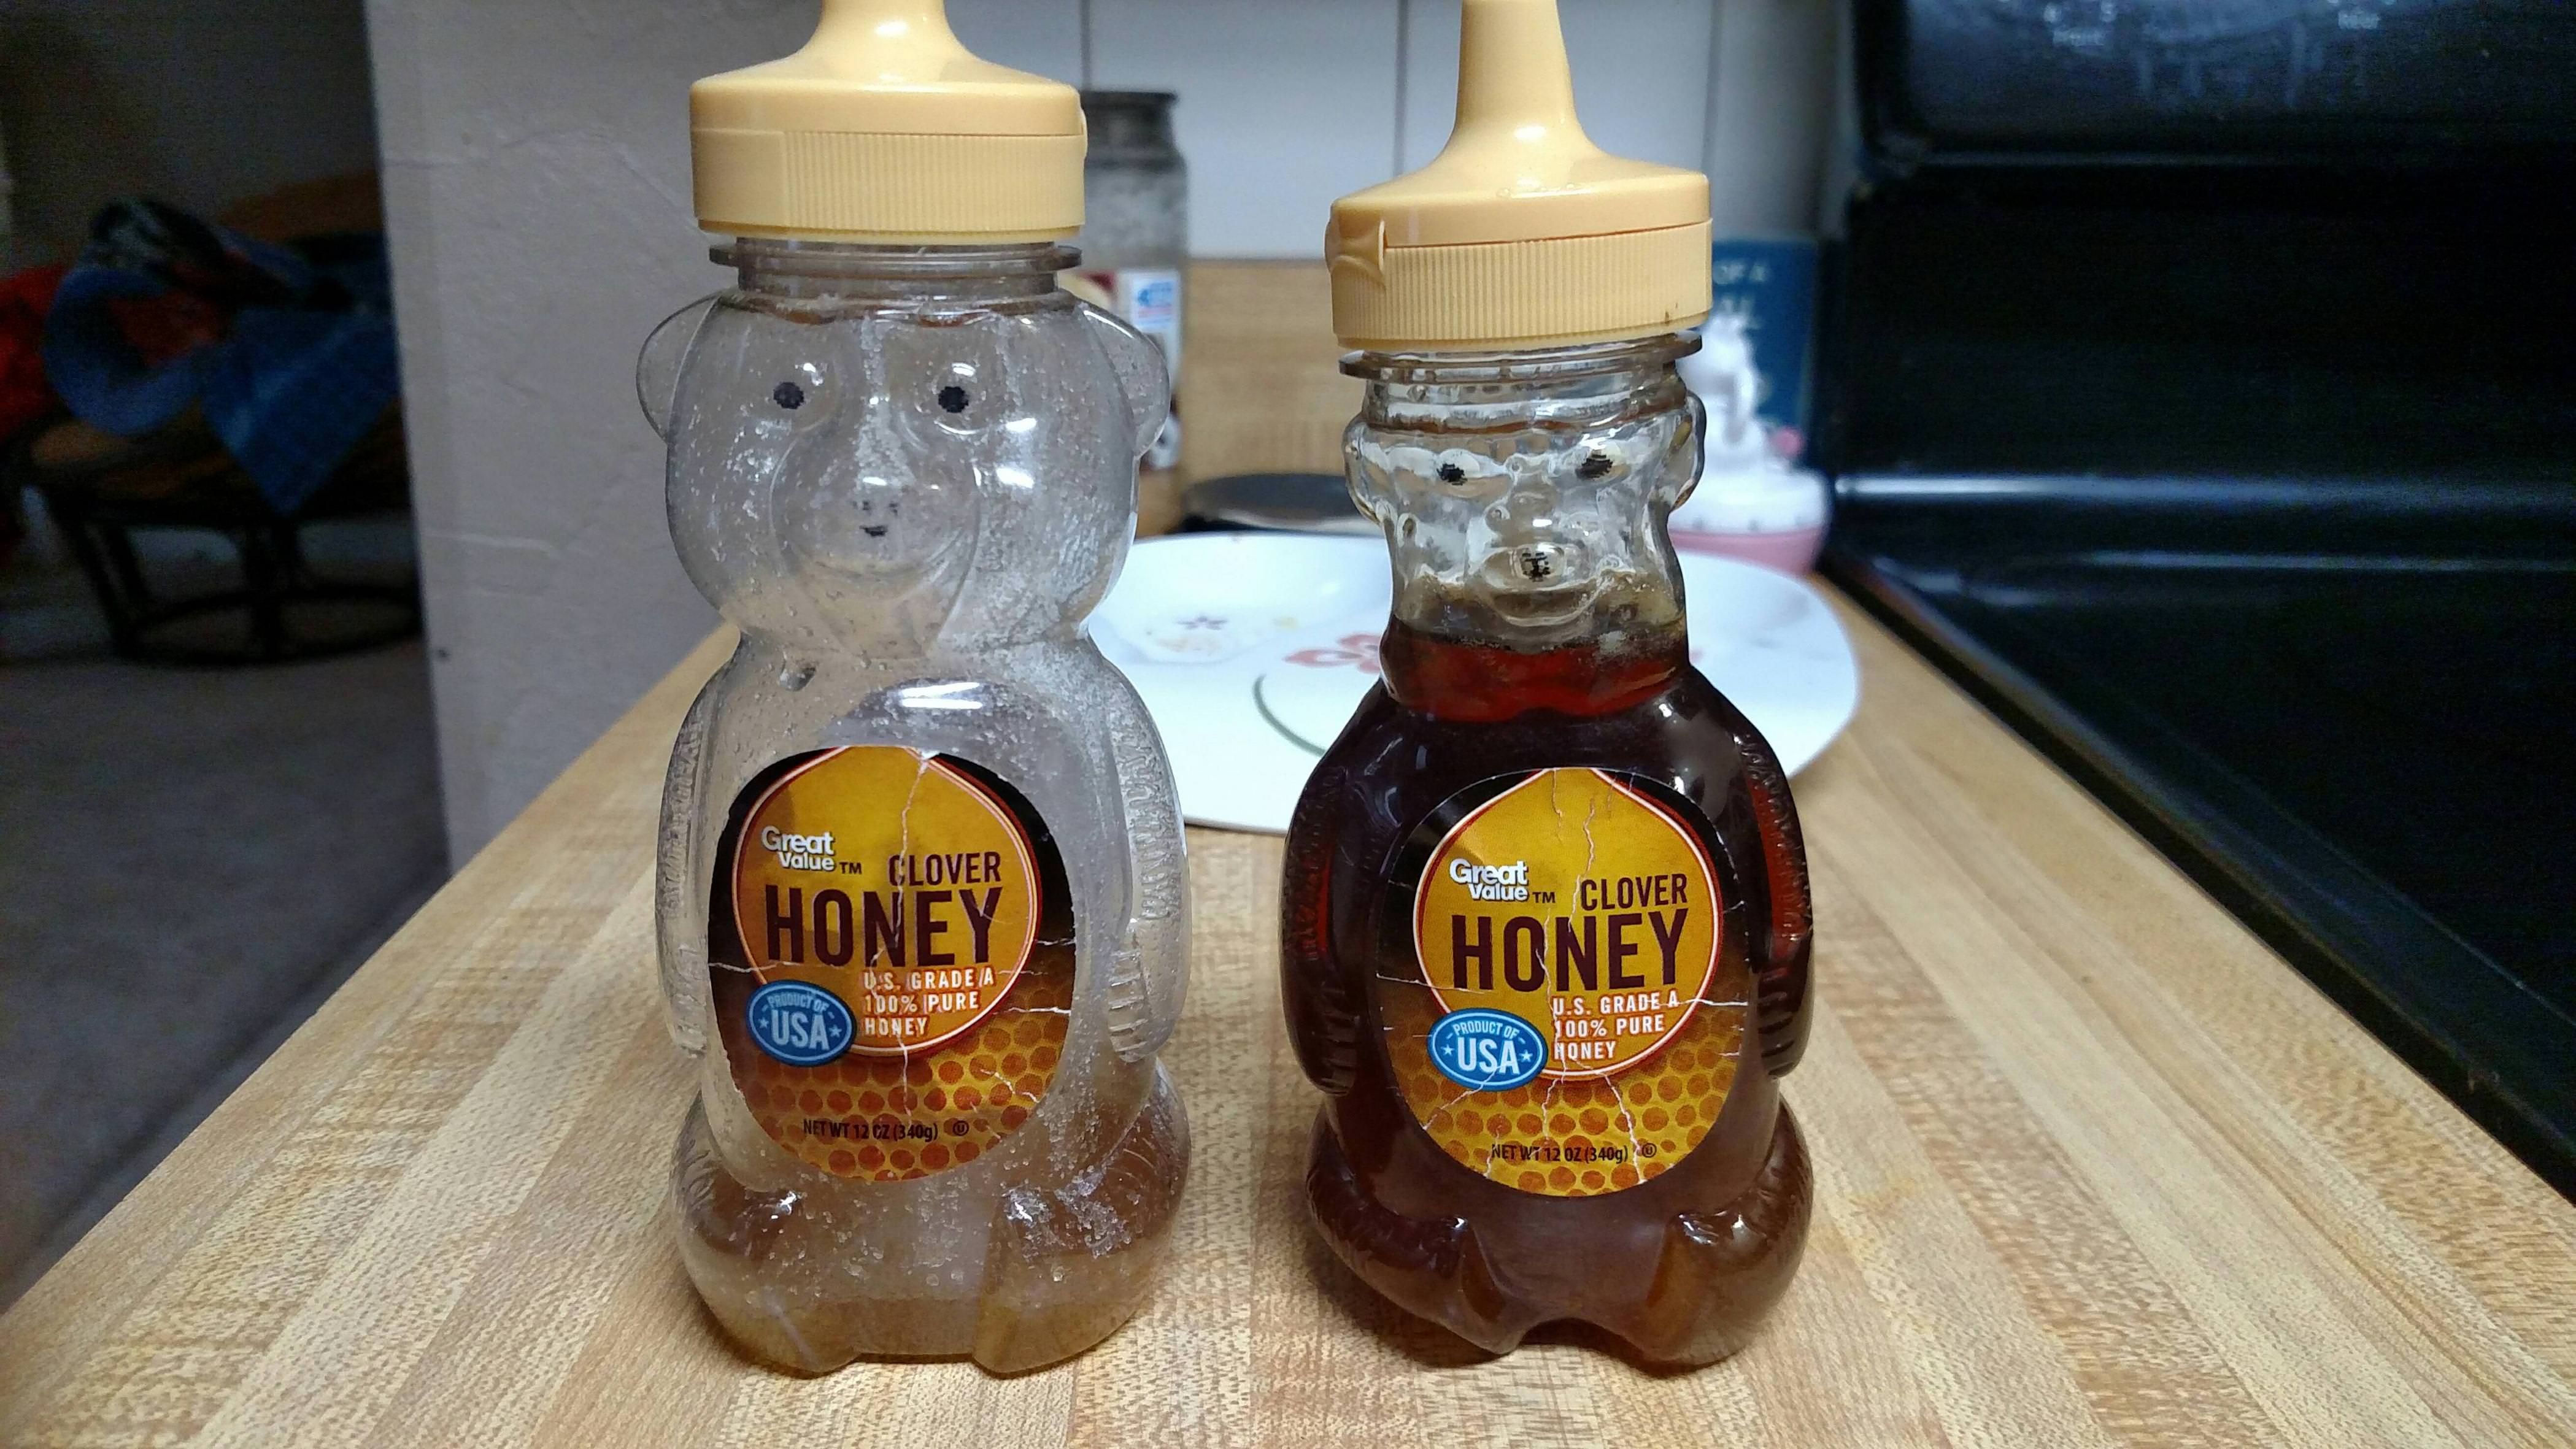 I accidentally melted a bottle of honey and now it looks like the inbred cousin